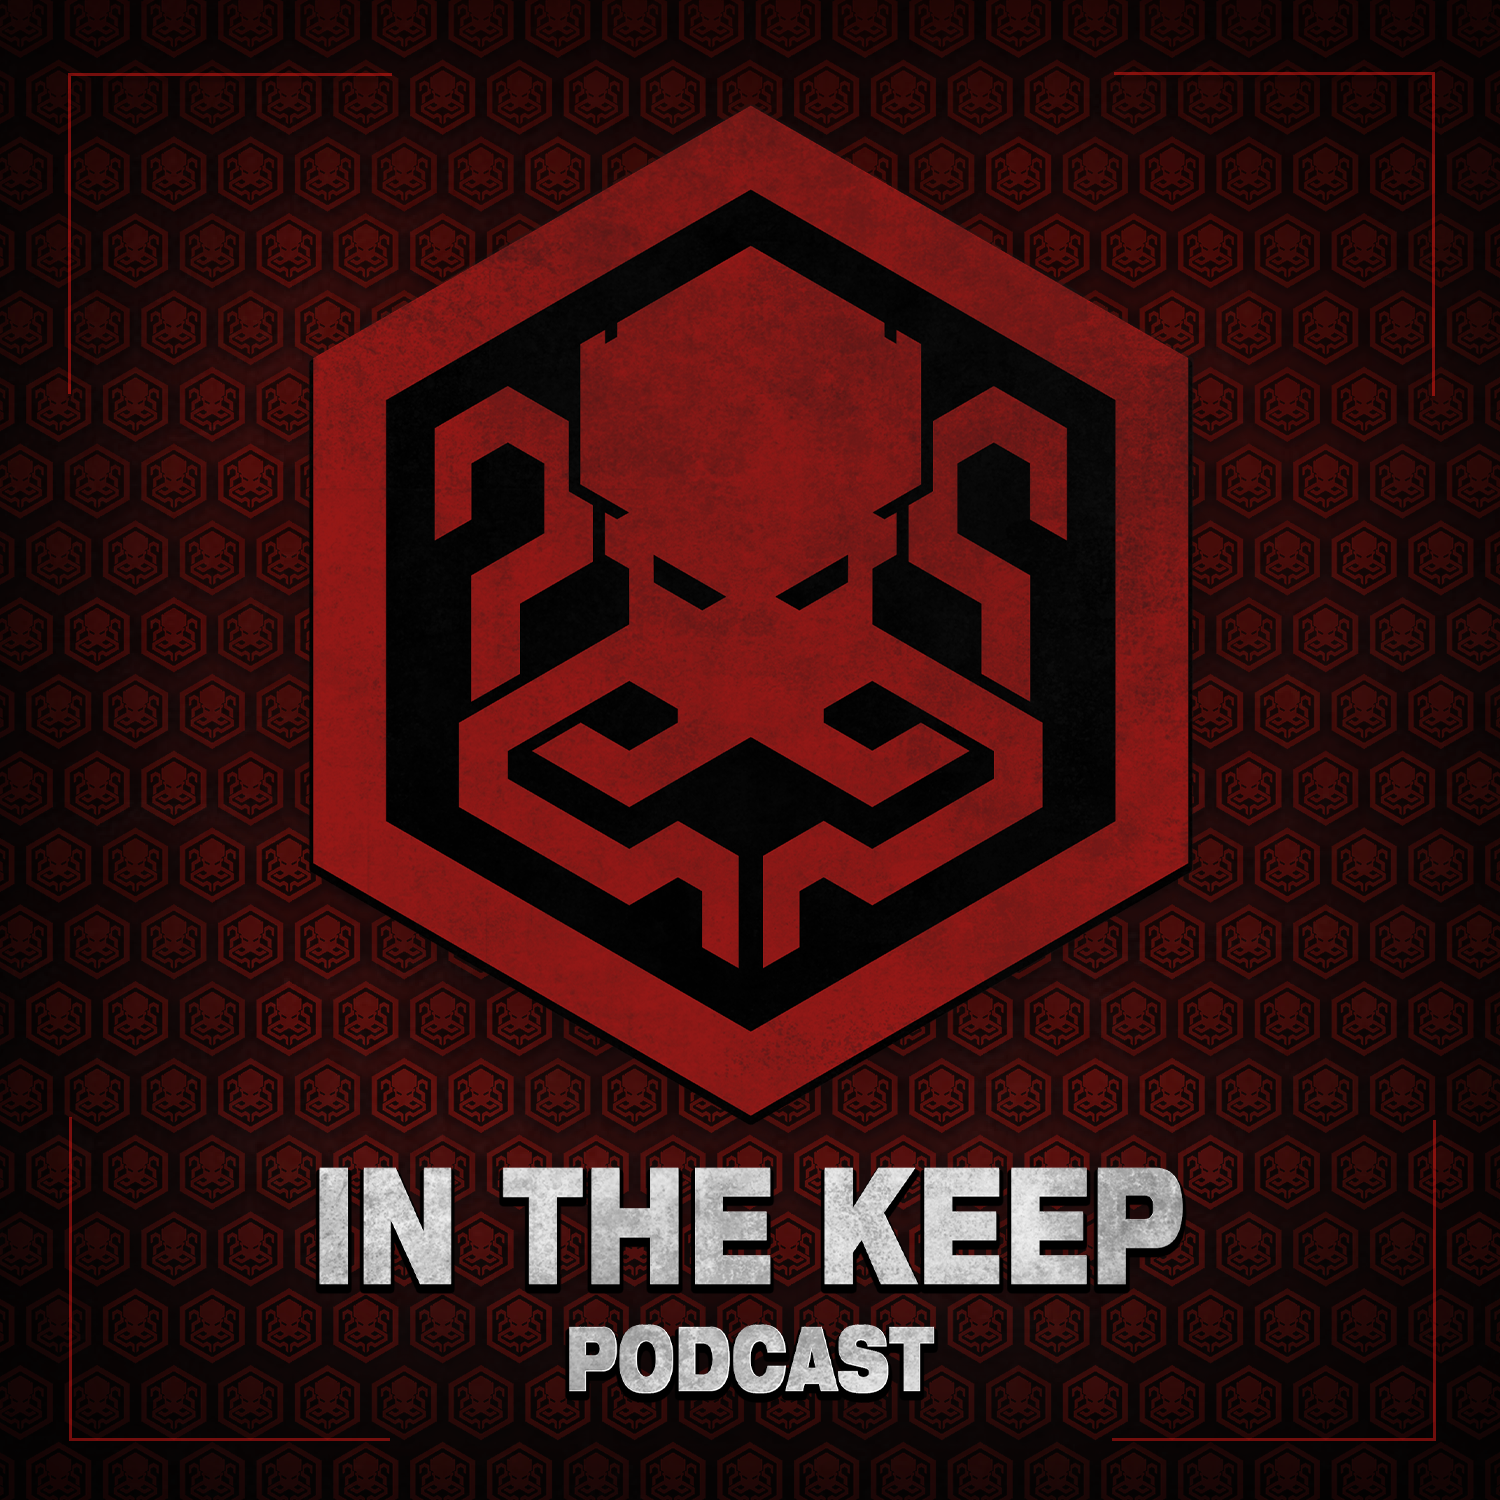 In The Keep Podcast - Episode 100 Parts 1, 2 & 3